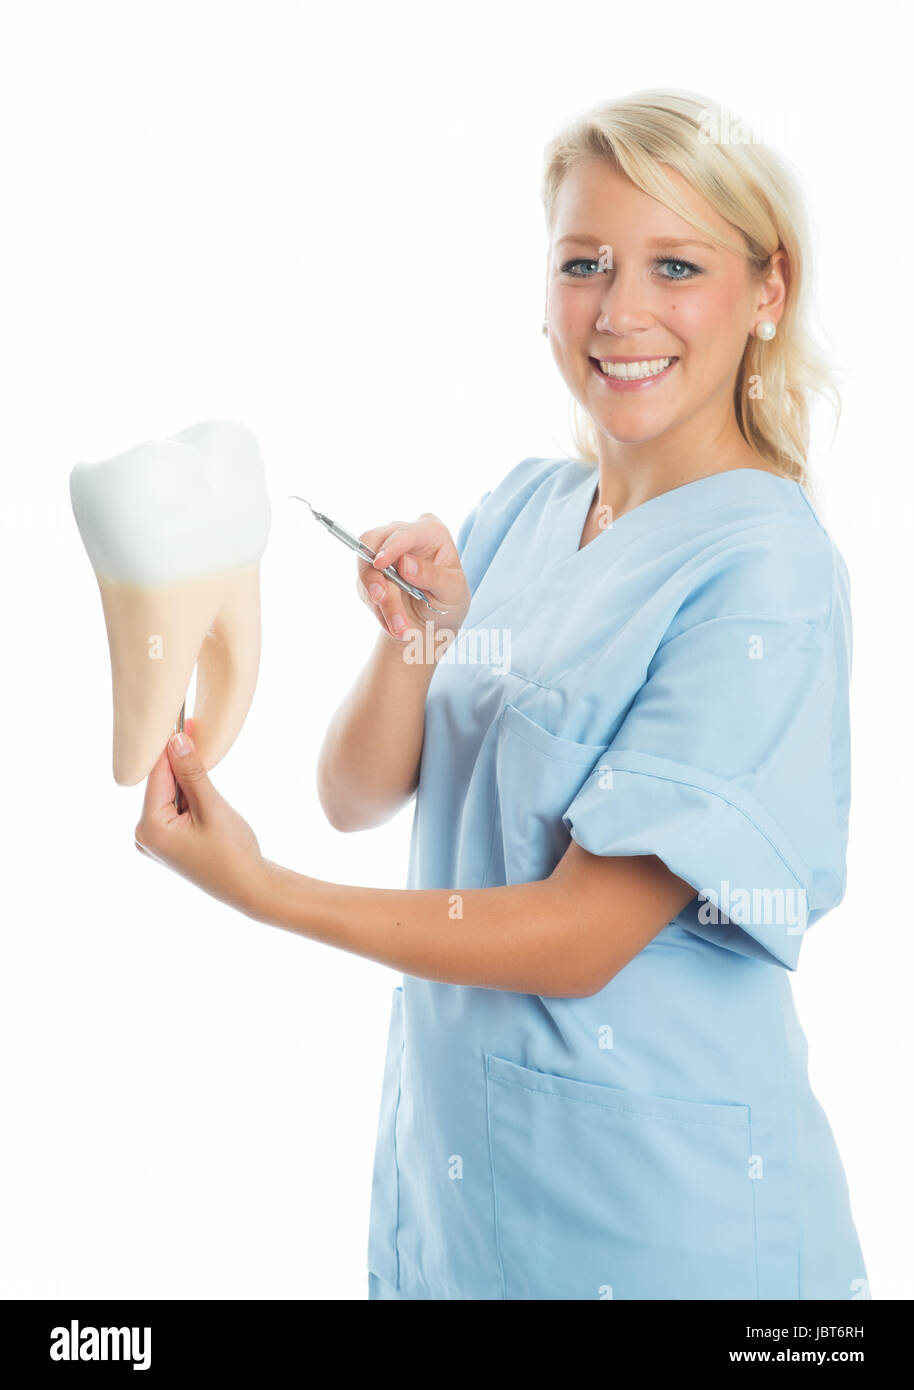 dentist explains tooth structure Stock Photo